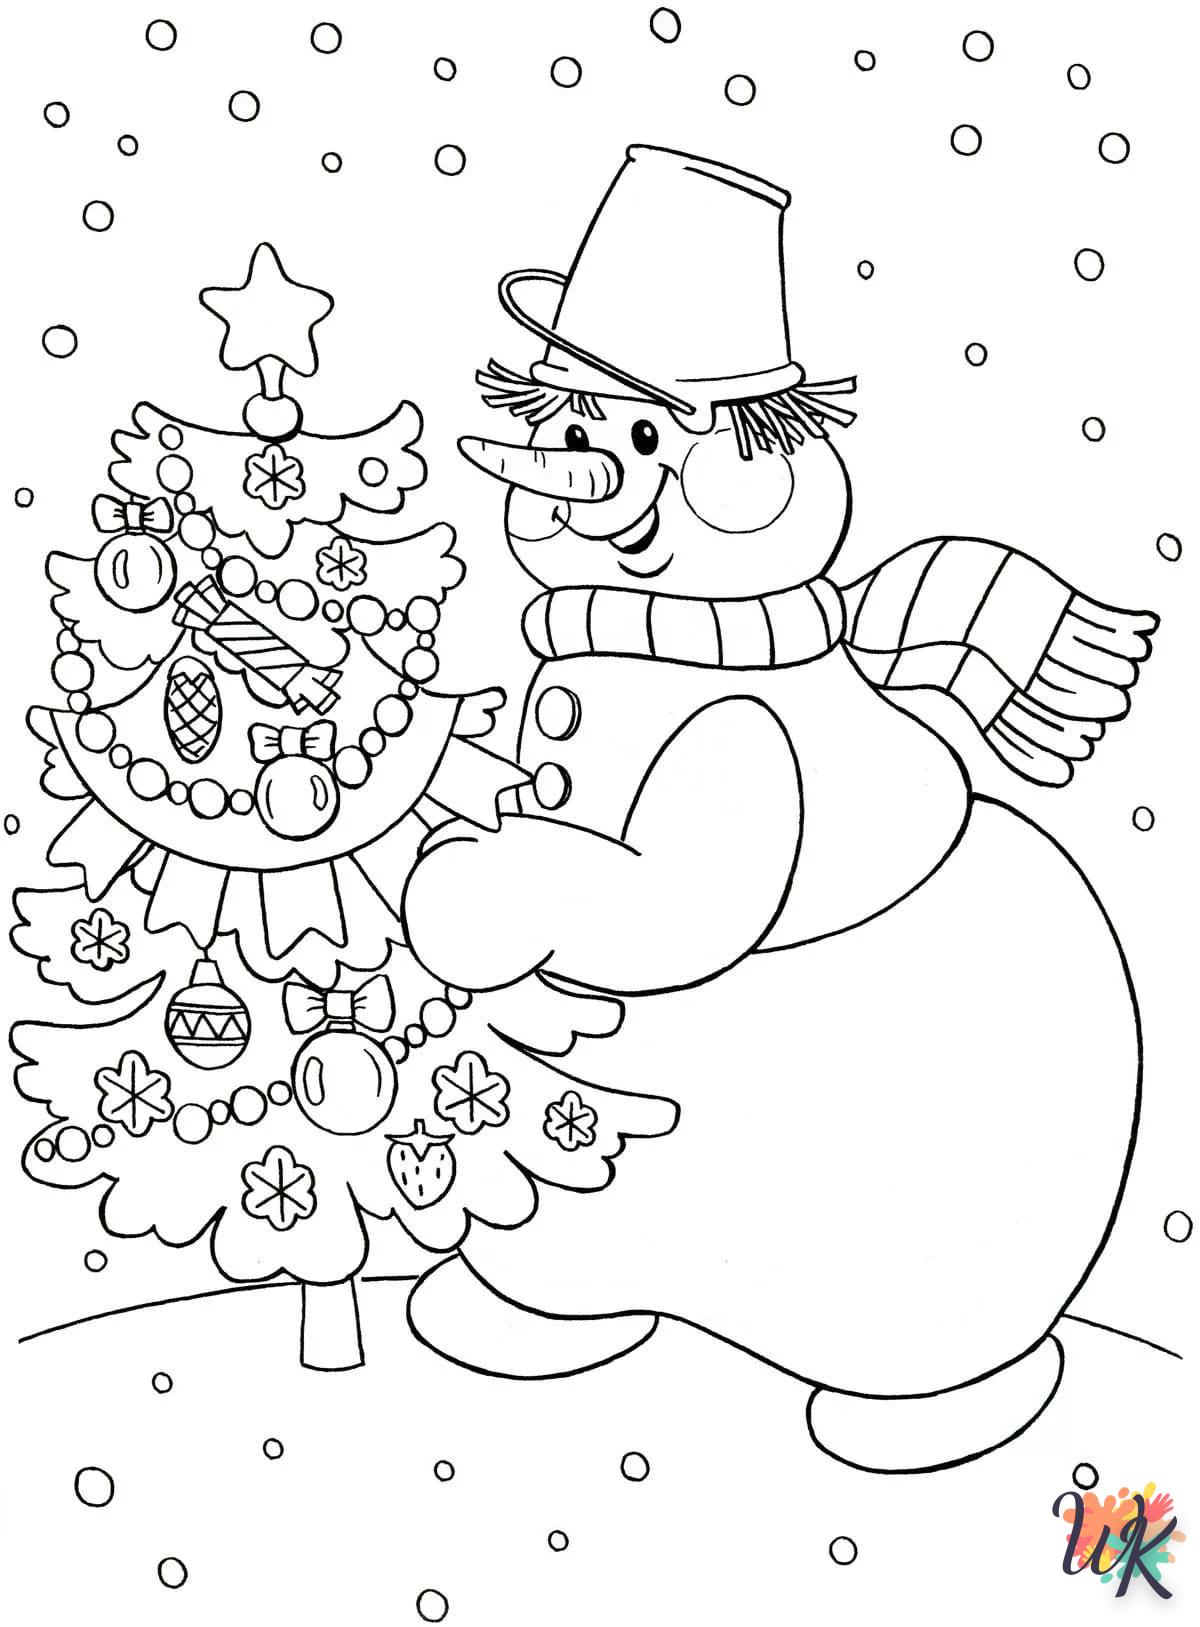 Snowman coloring online to color